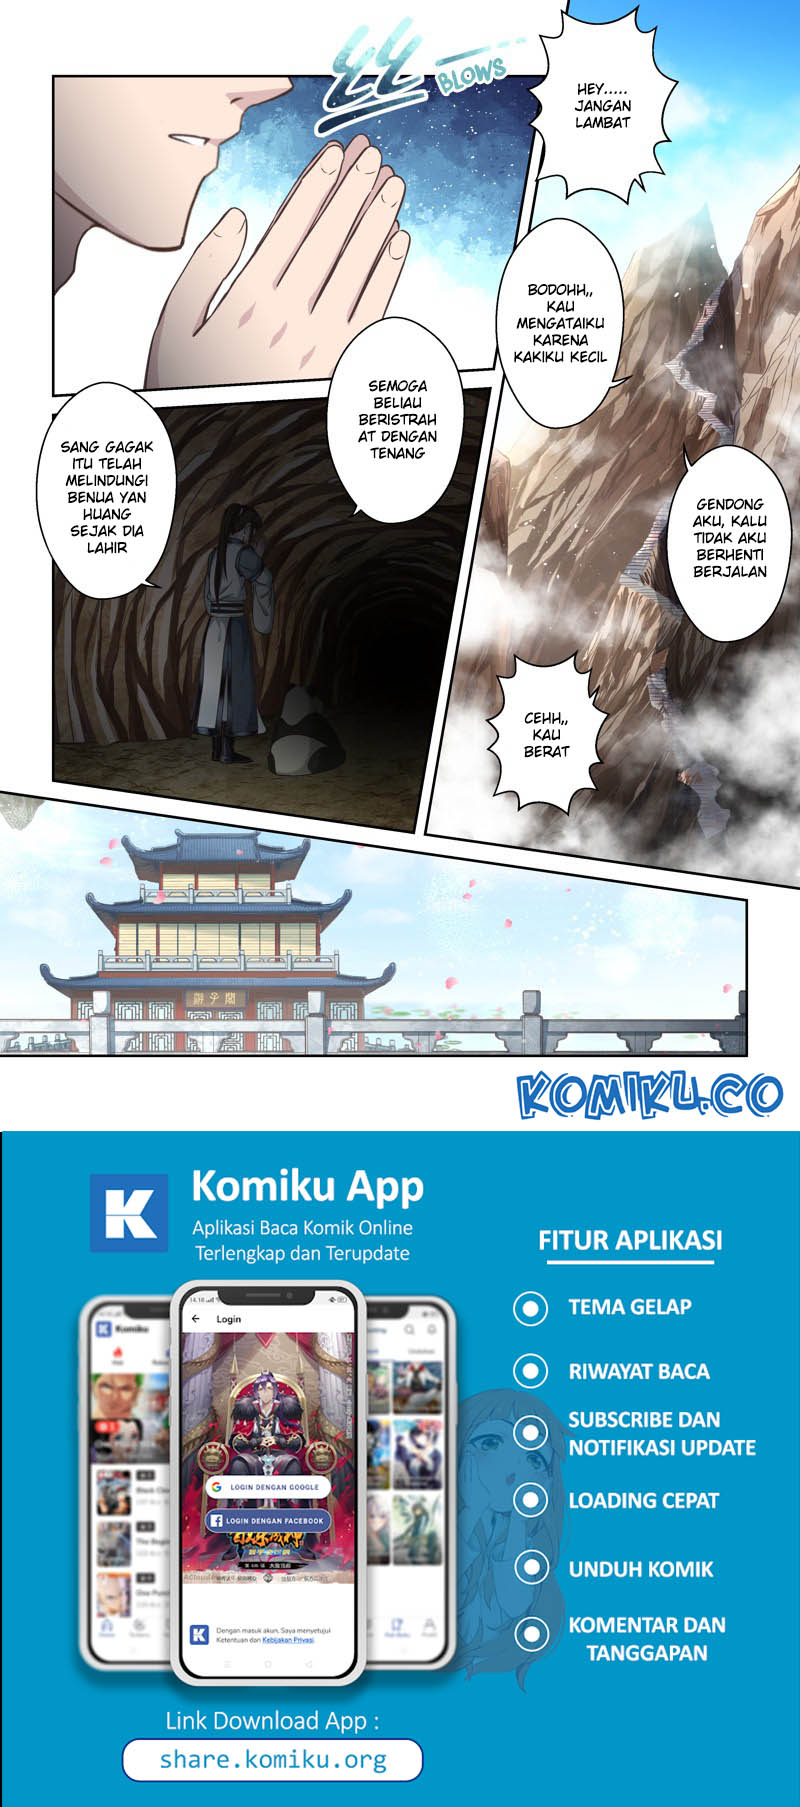 Holy Ancestor Chapter 135